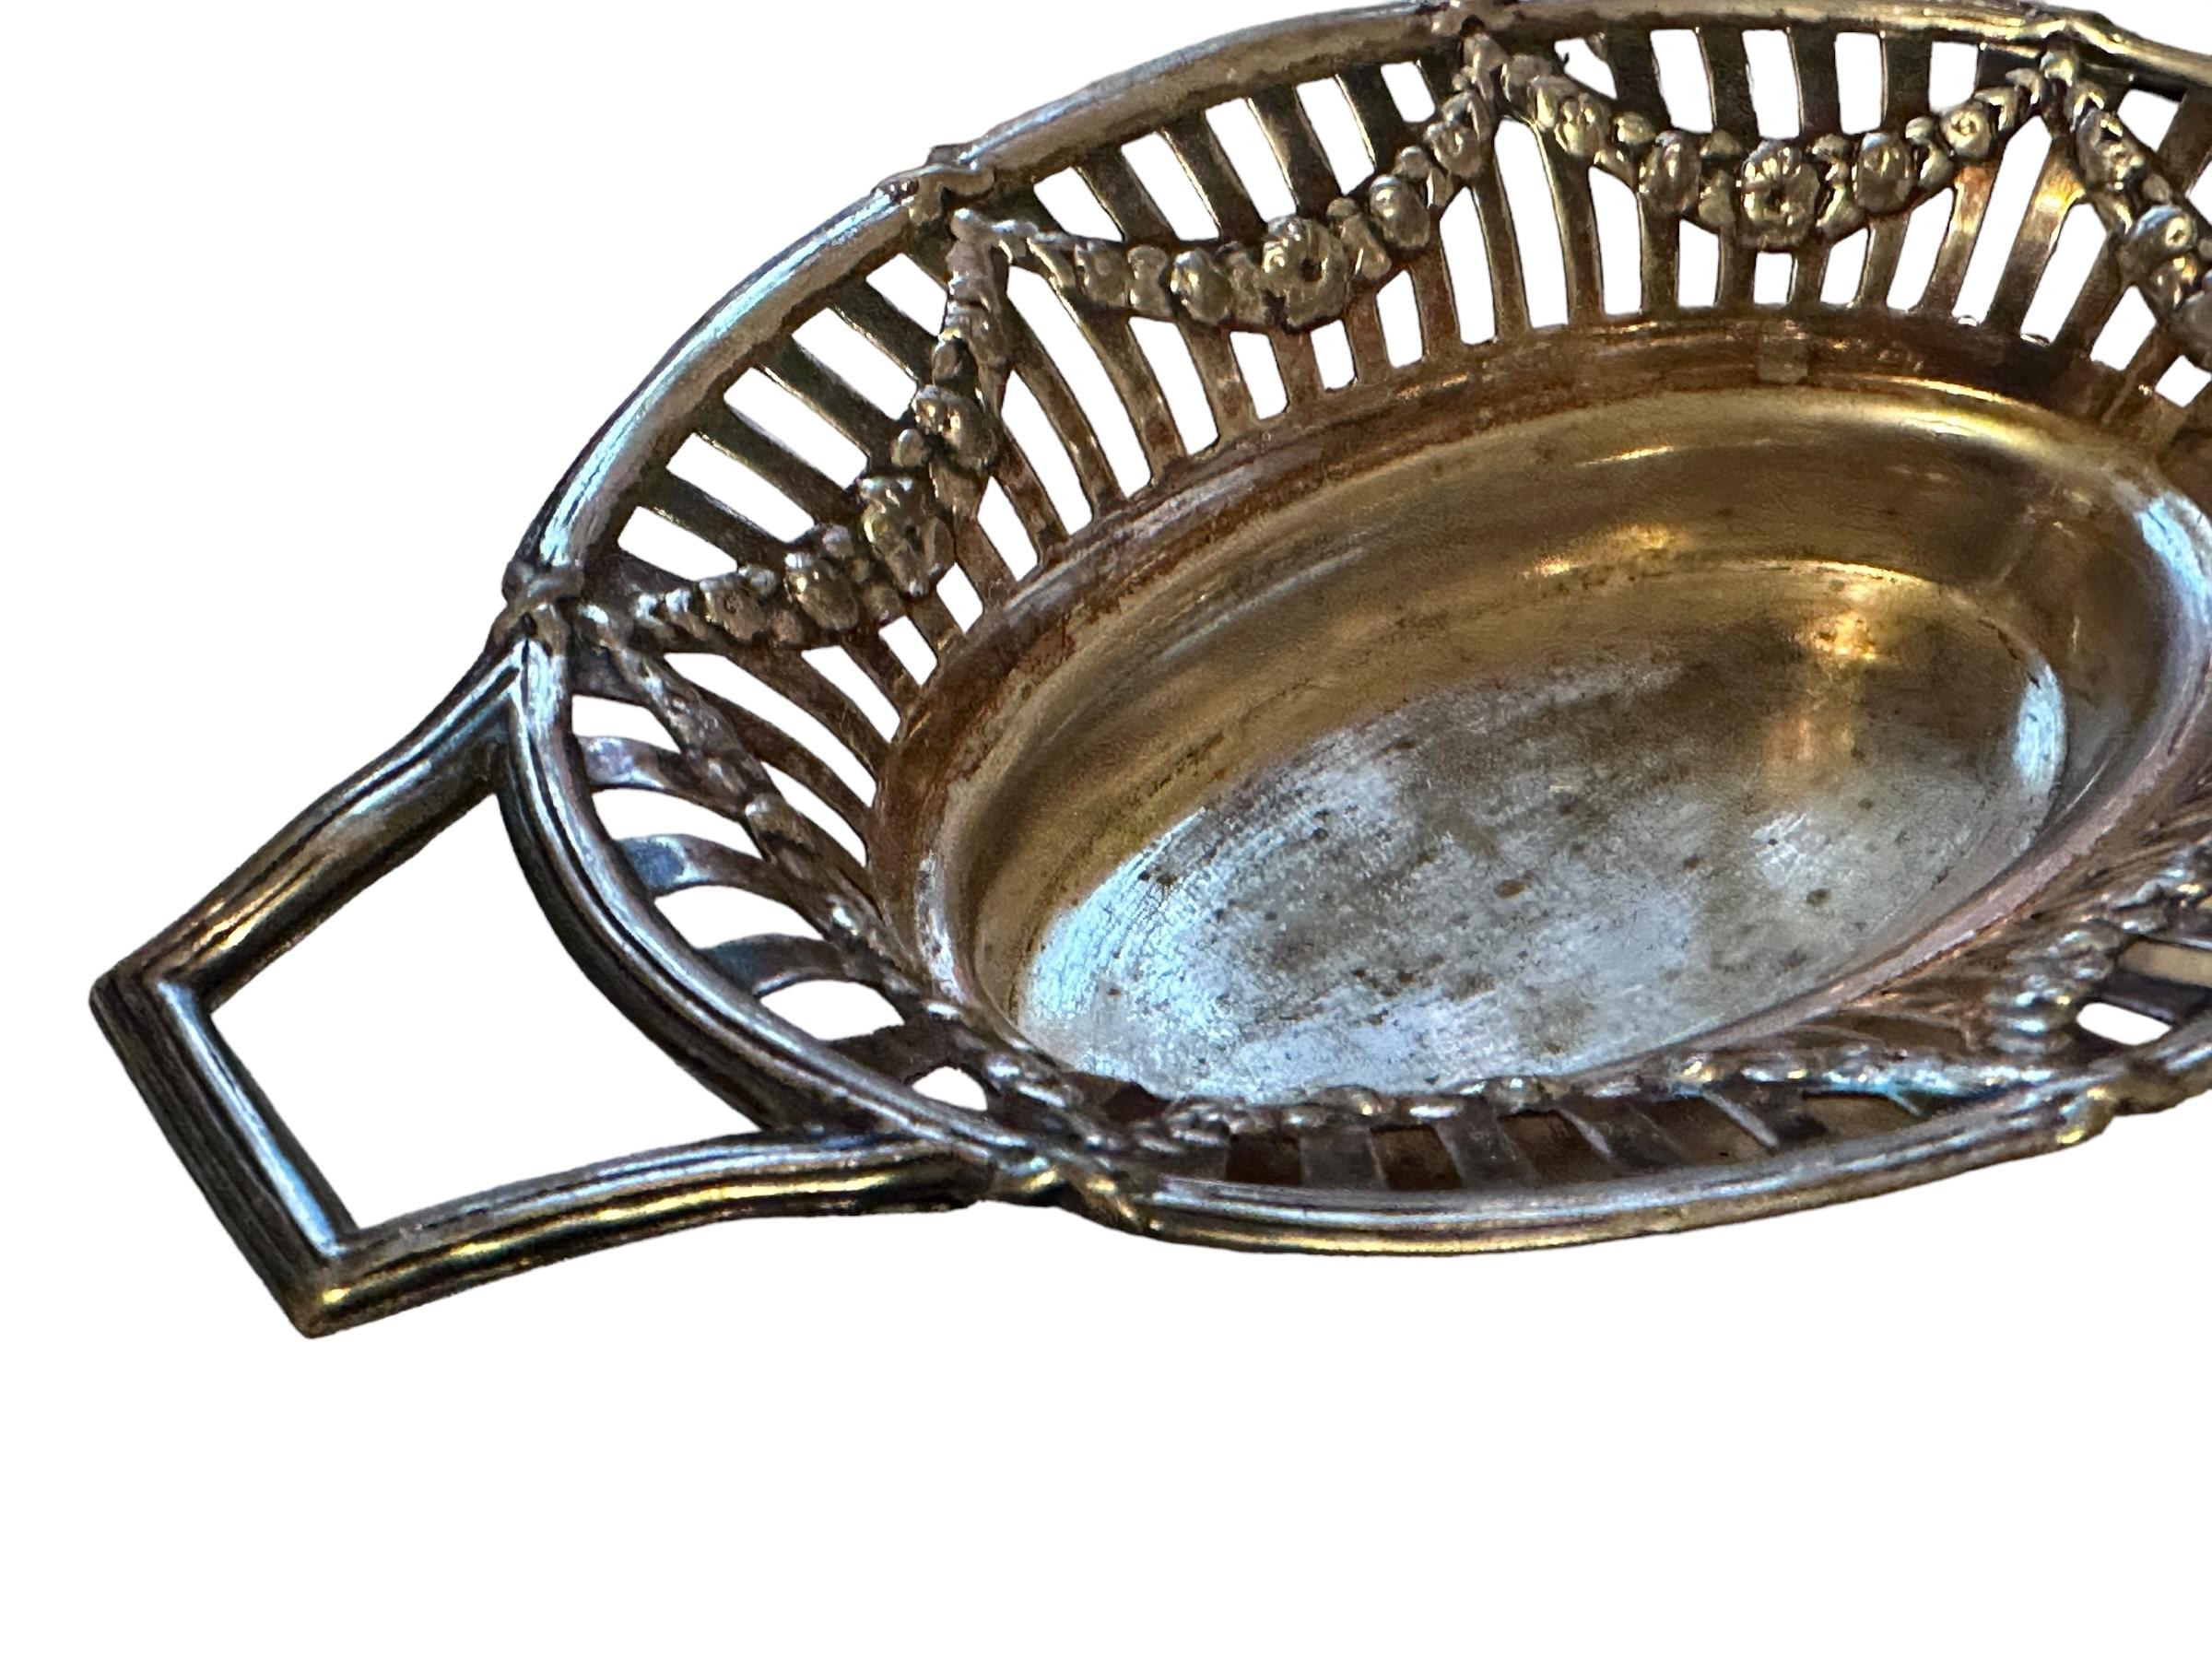 Vintage Silver Plate Candy Dish Basket Tray, 1910s, Germany or Austria For Sale 2